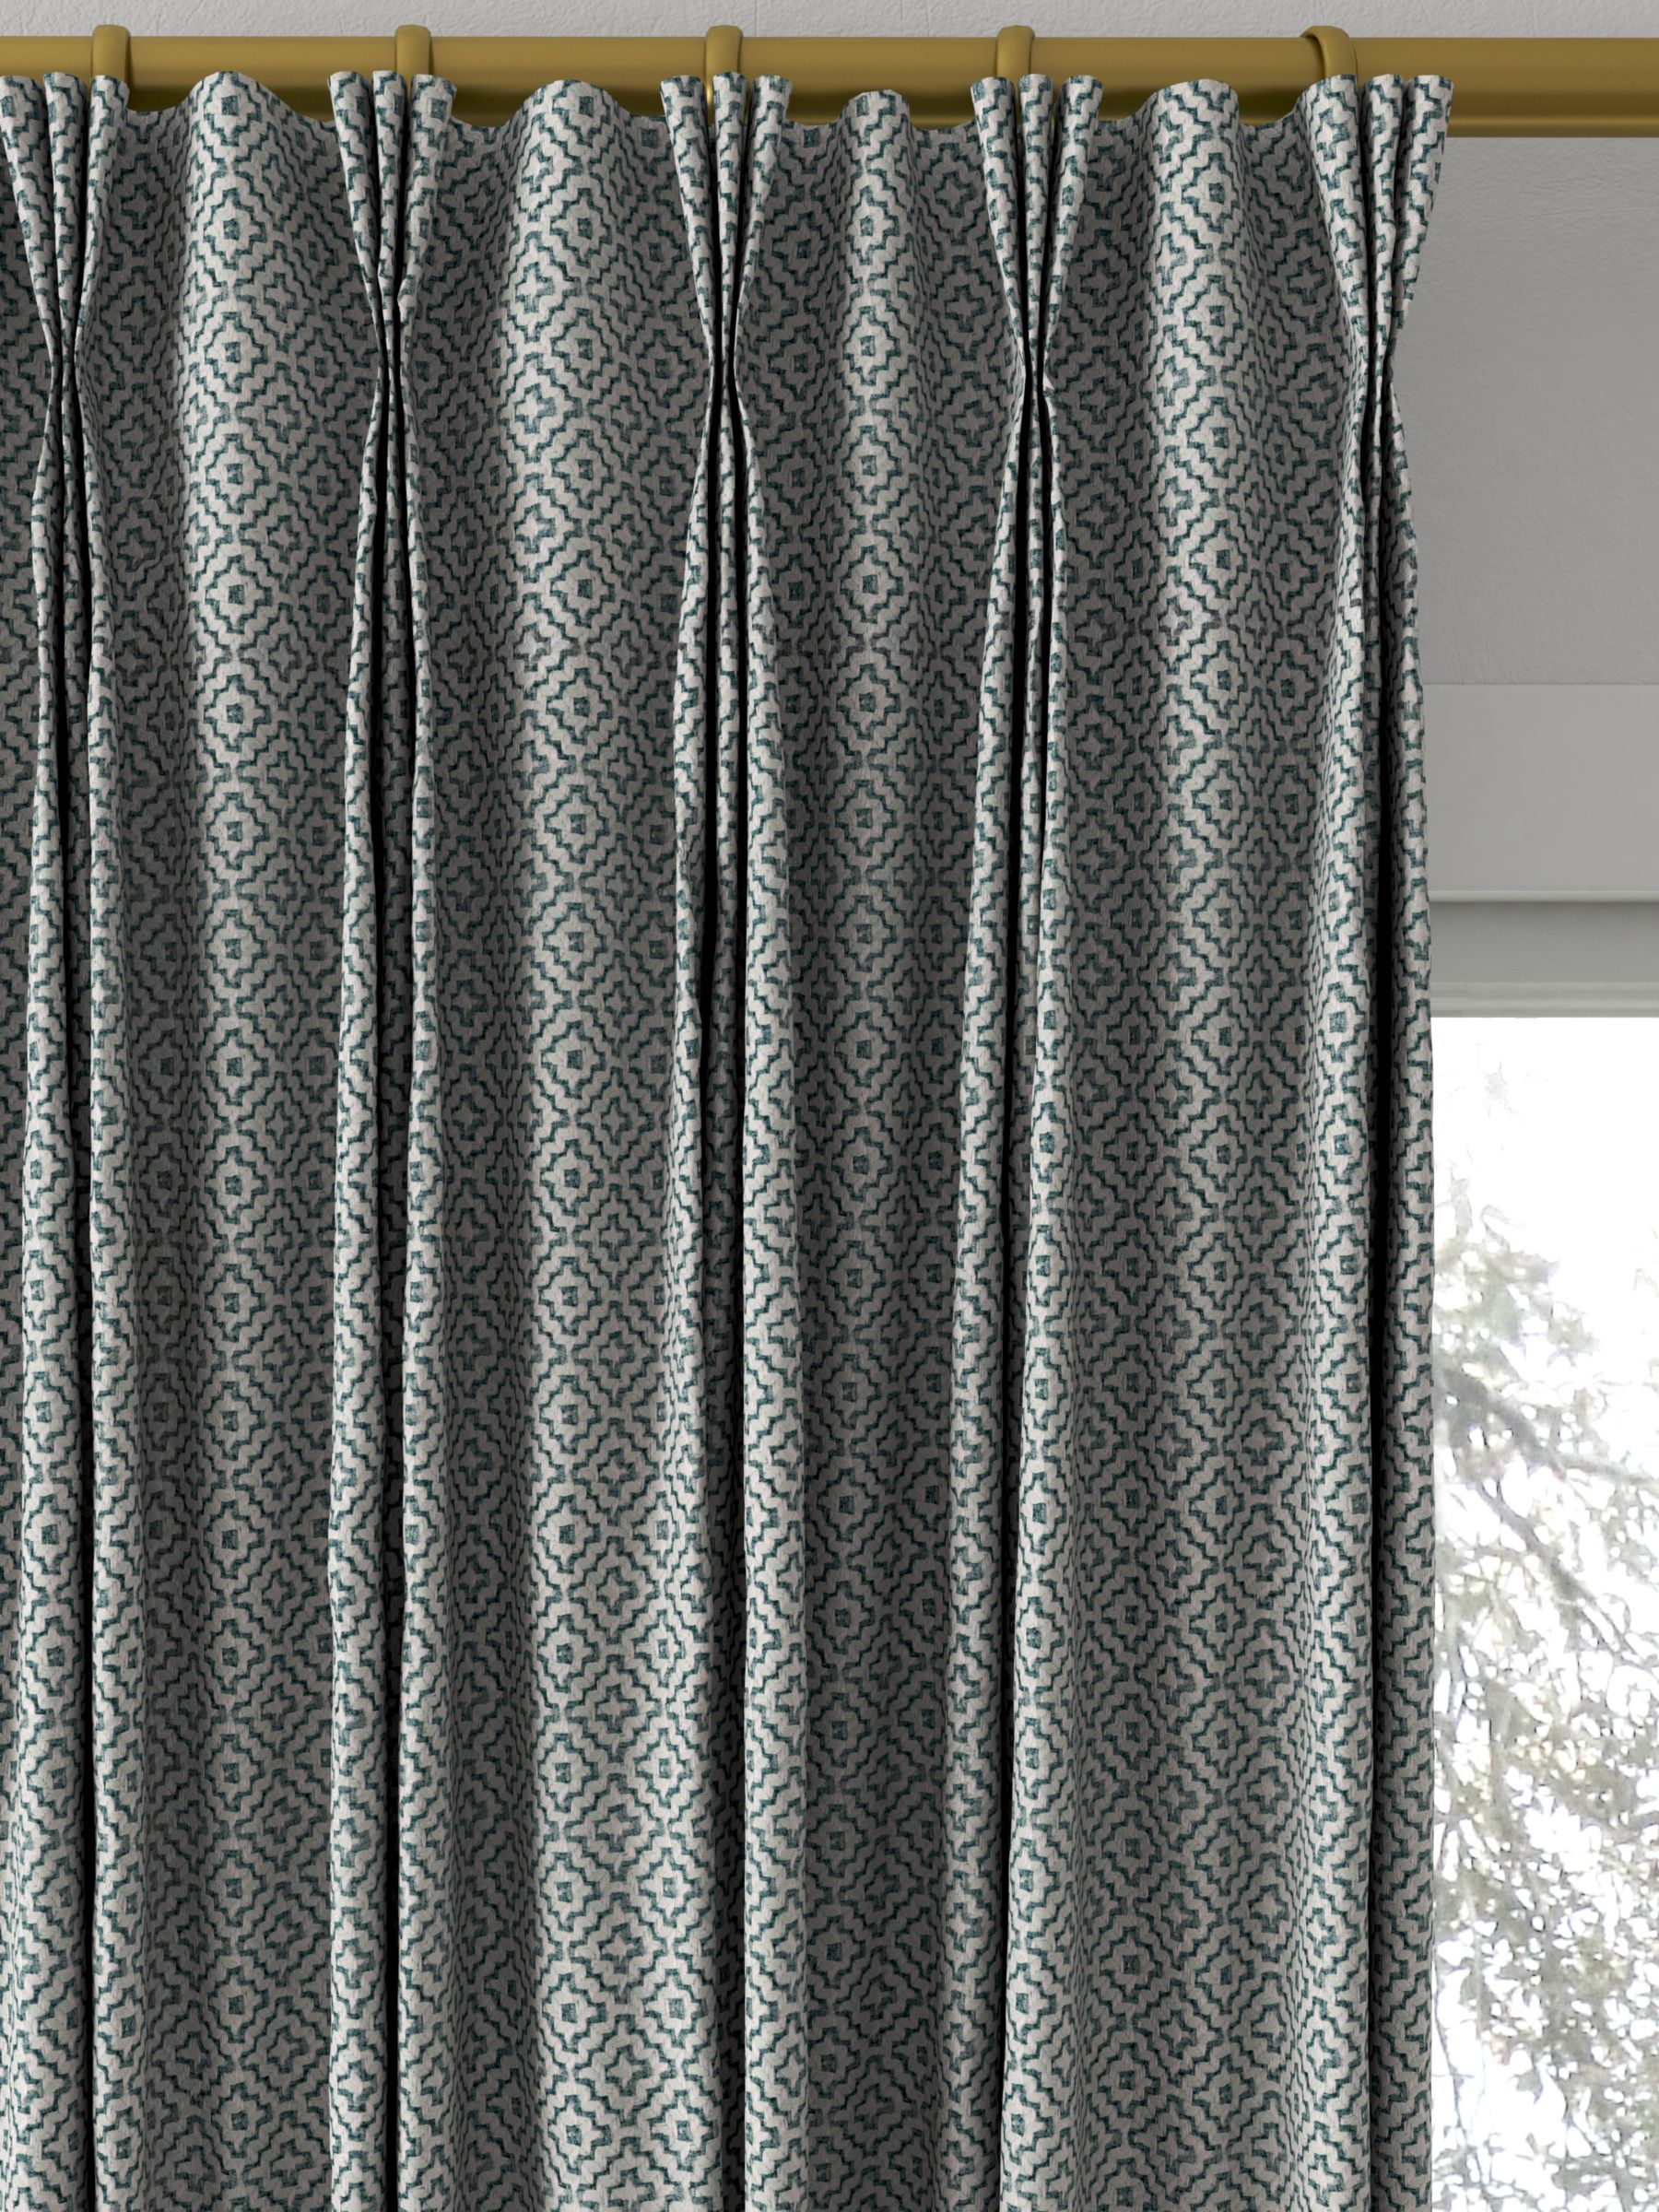 Sanderson Linden Made to Measure Curtains, Teal